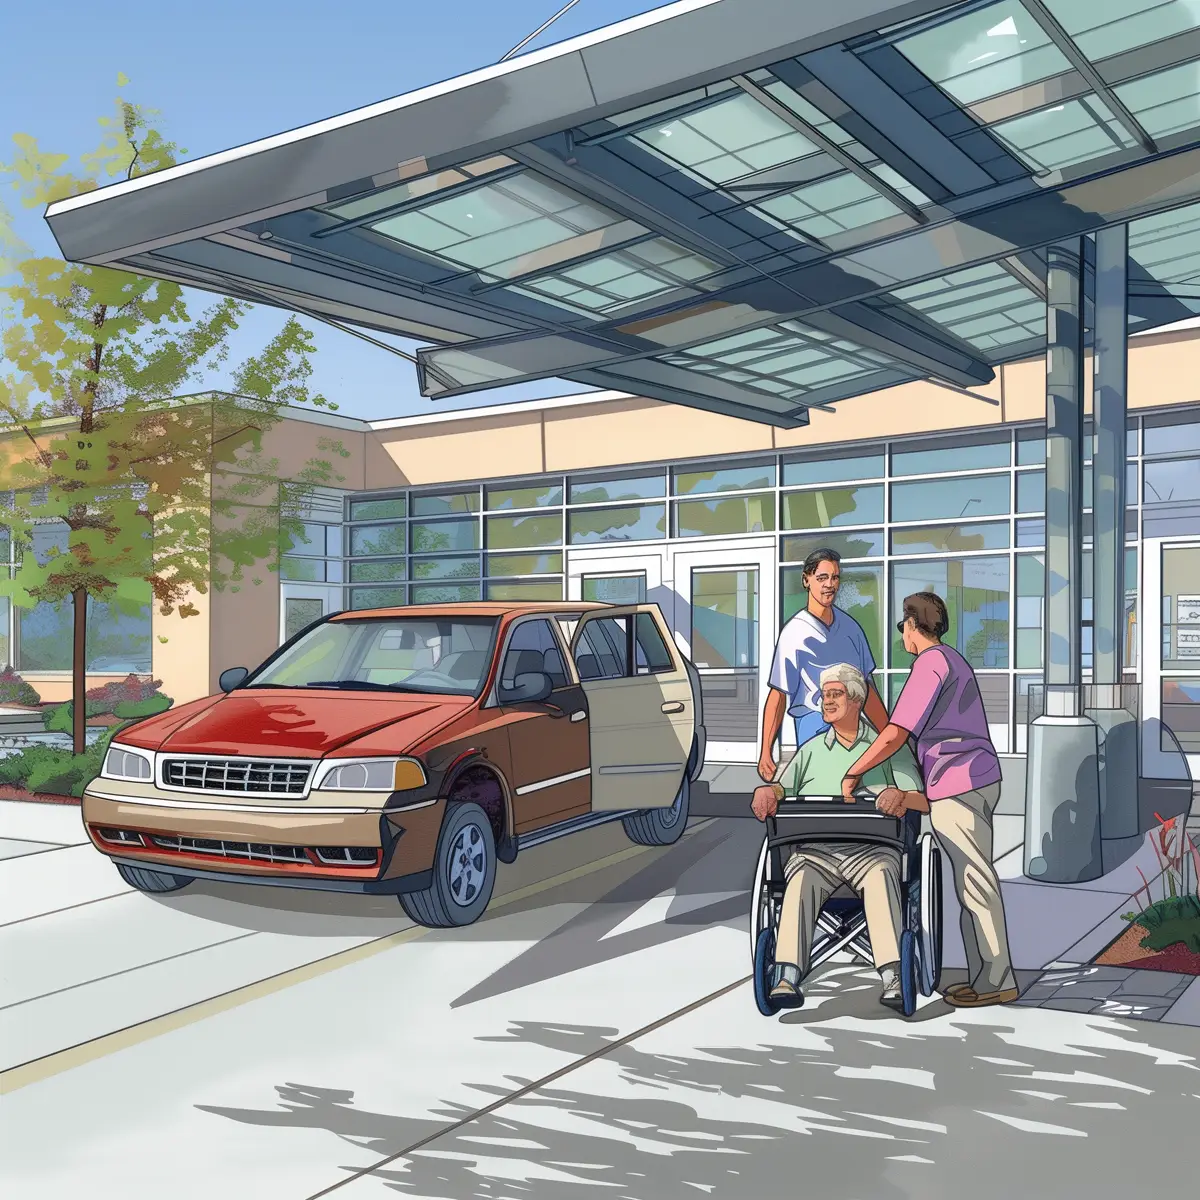 Hospital Discharge Waiting Room and Transportation Proposal Concepts